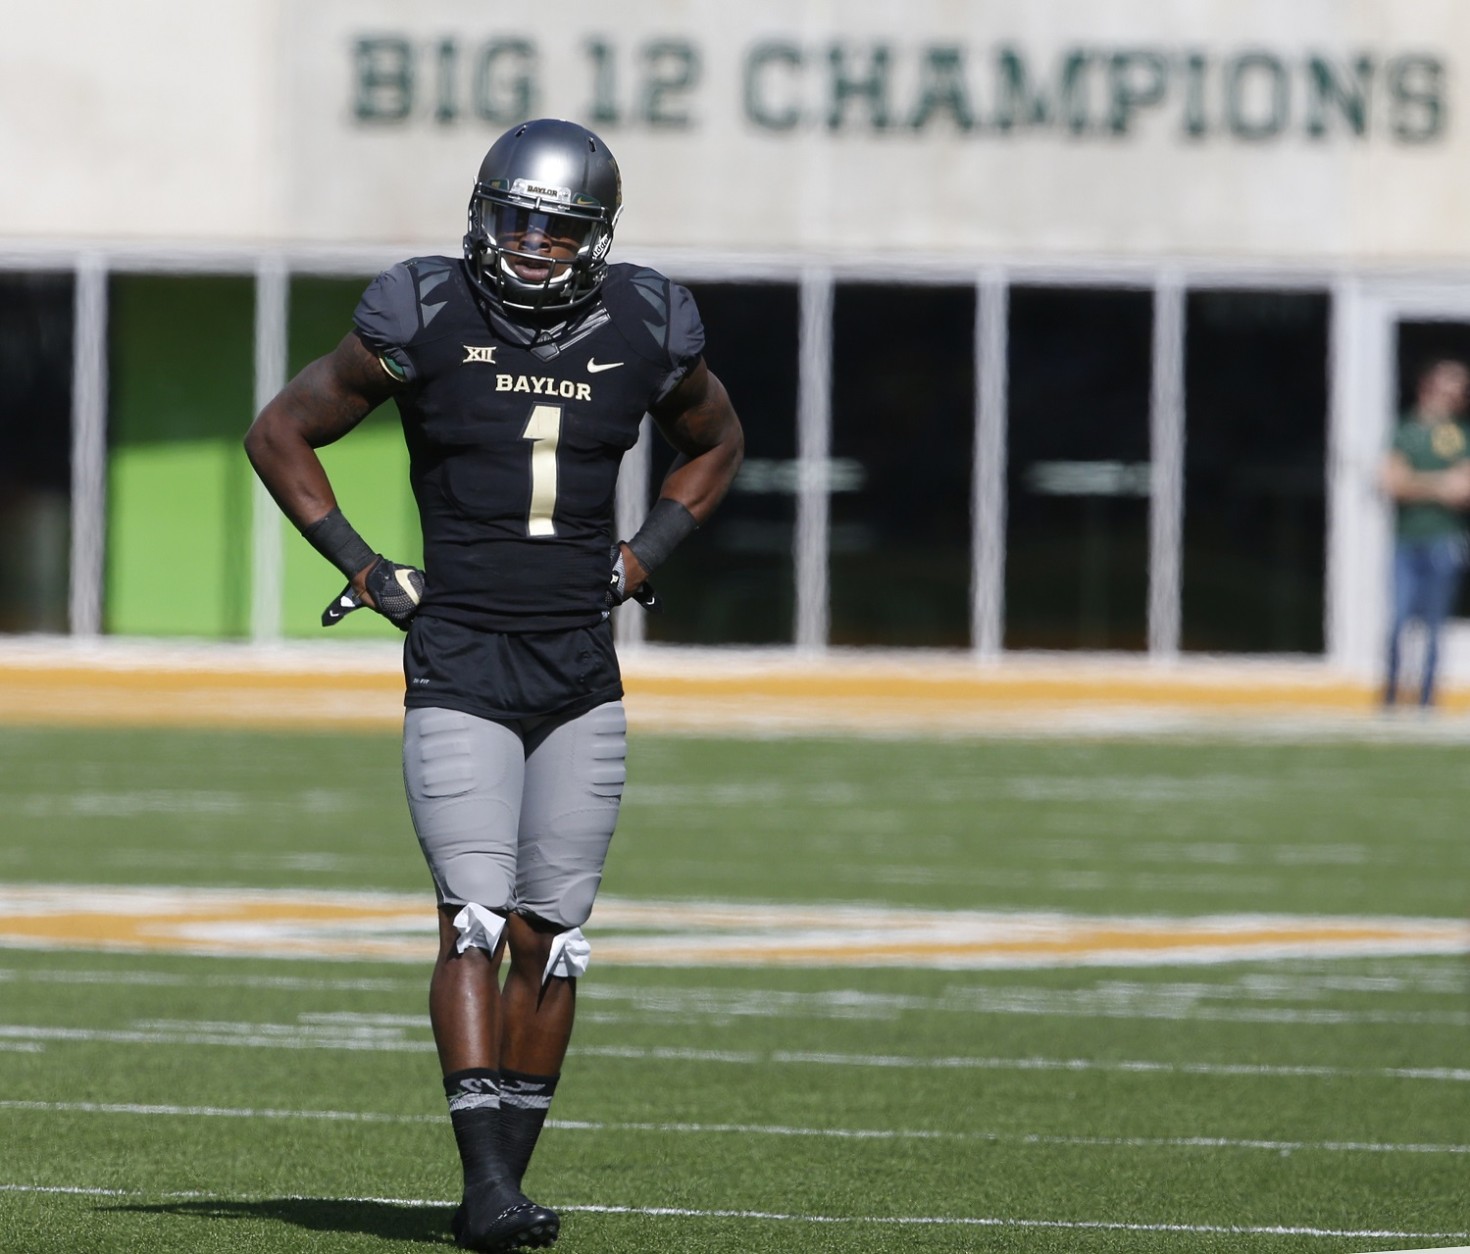 Baylor wide receiver Corey Coleman (1) waits for play to being against West Virginia  in the first half of an NCAA college football game, Saturday, Oct 17, 2015, in Waco, Texas. (AP Photo/Rod Aydelotte)